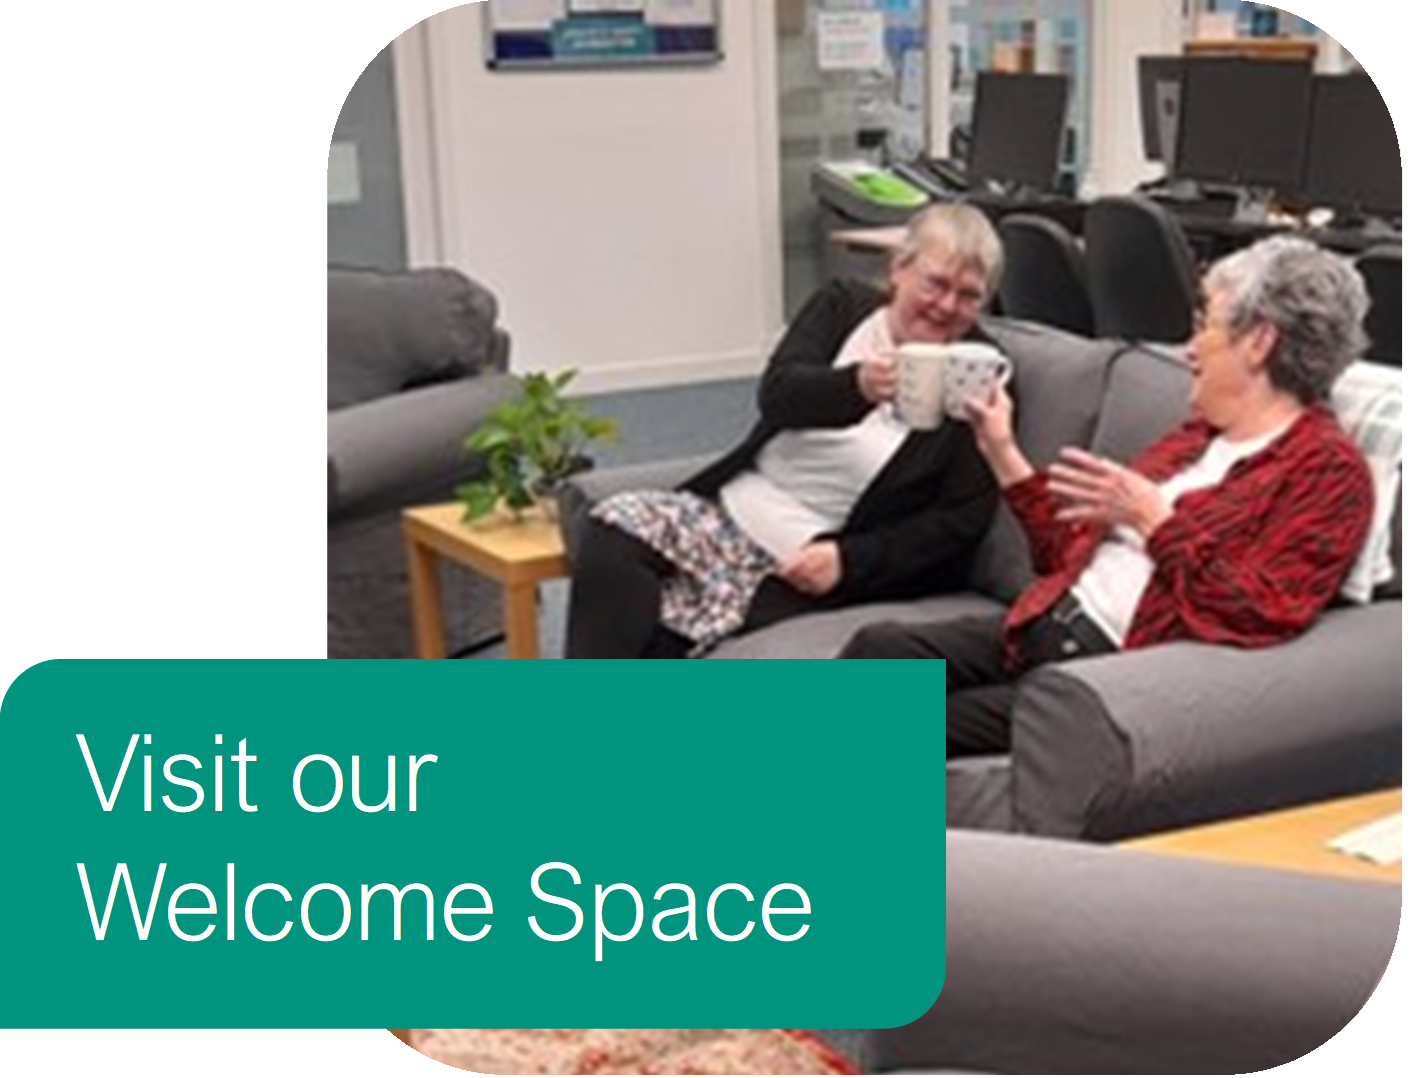 PIC - EVENTS - Welcome space link picture with 2 people drinking tea on sofa